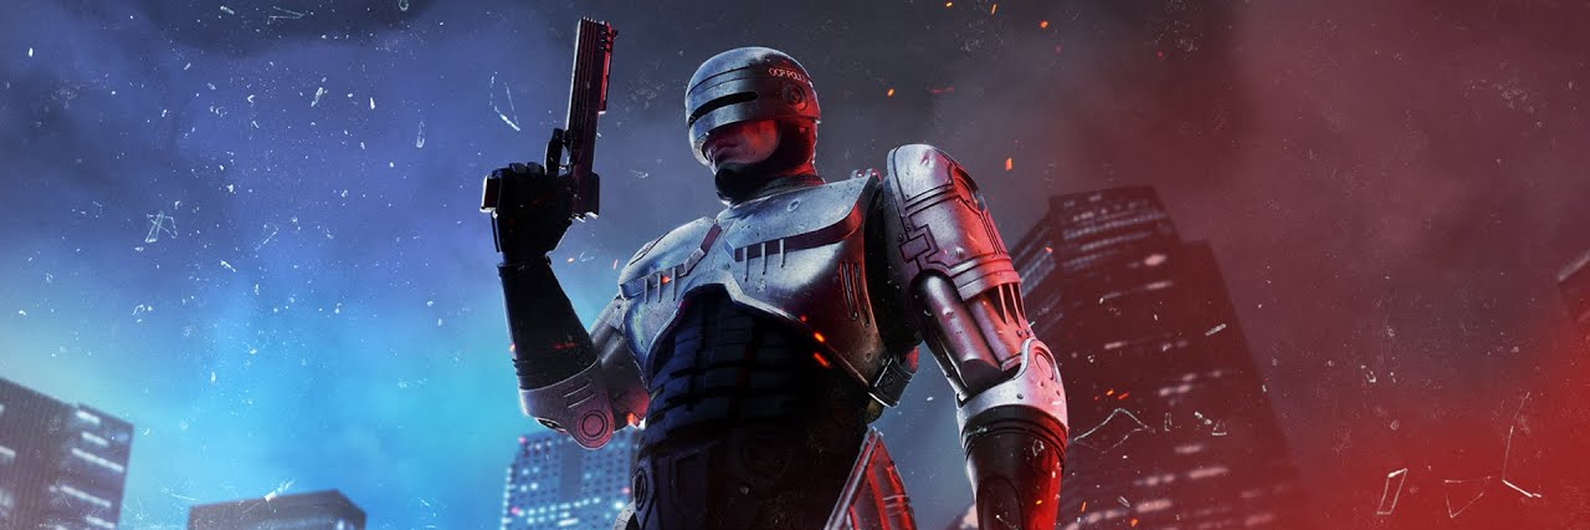 Maximum immersion into childhood": RoboCop Rogue City launched on Steam with many positive reviews